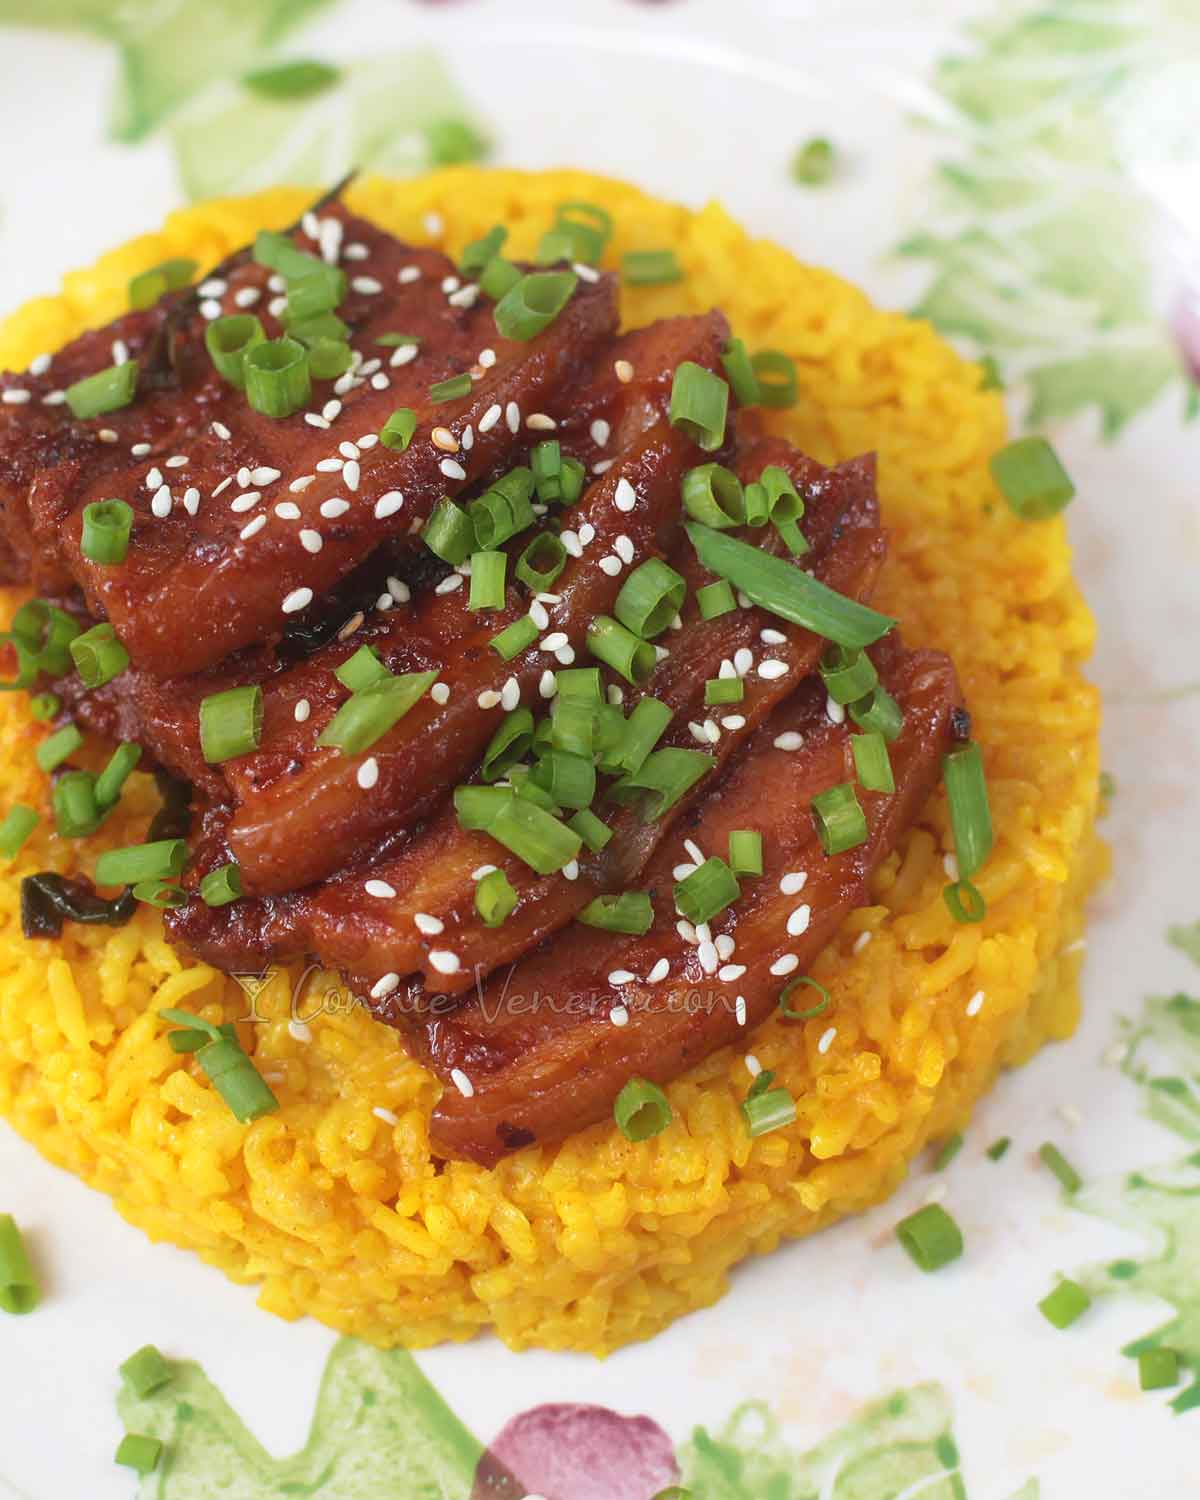 Korean-style Pan-grilled Spicy Pork Belly